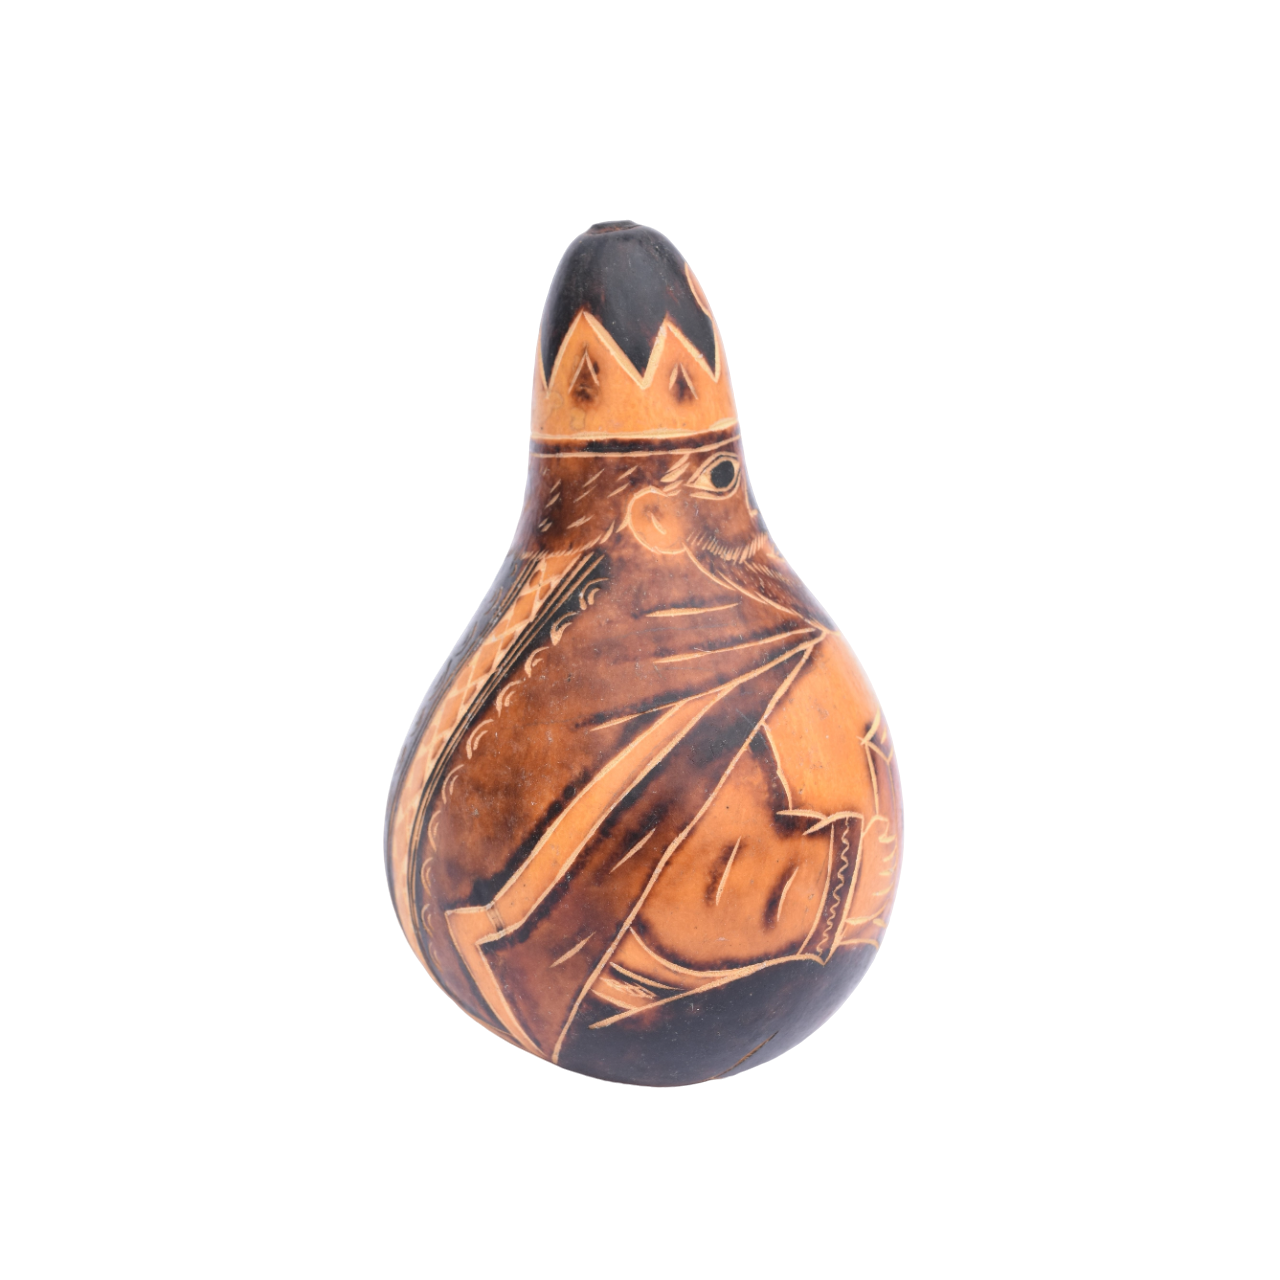 Handcarved Peruvian Gourd, Man with Incense Offering Gourd, Religious Home Decor